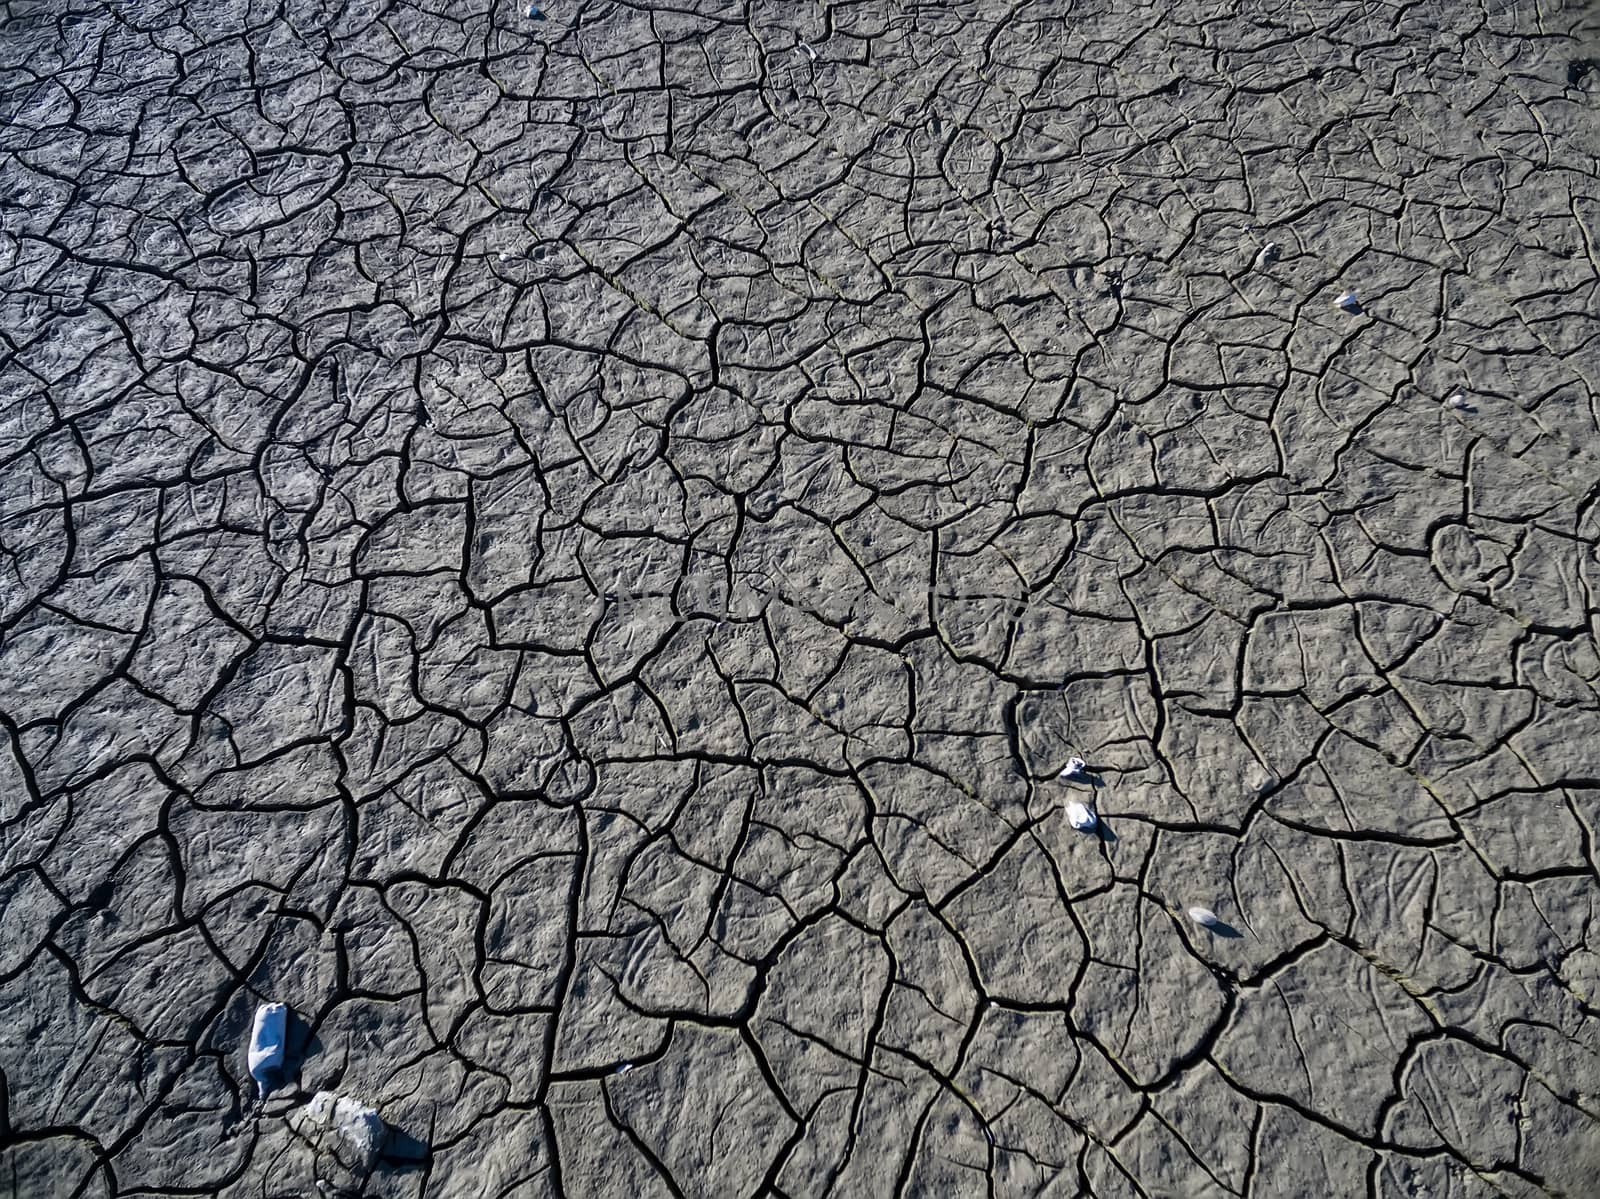 Dry lake bed with natural texture of cracked clay in perspective by ververidis